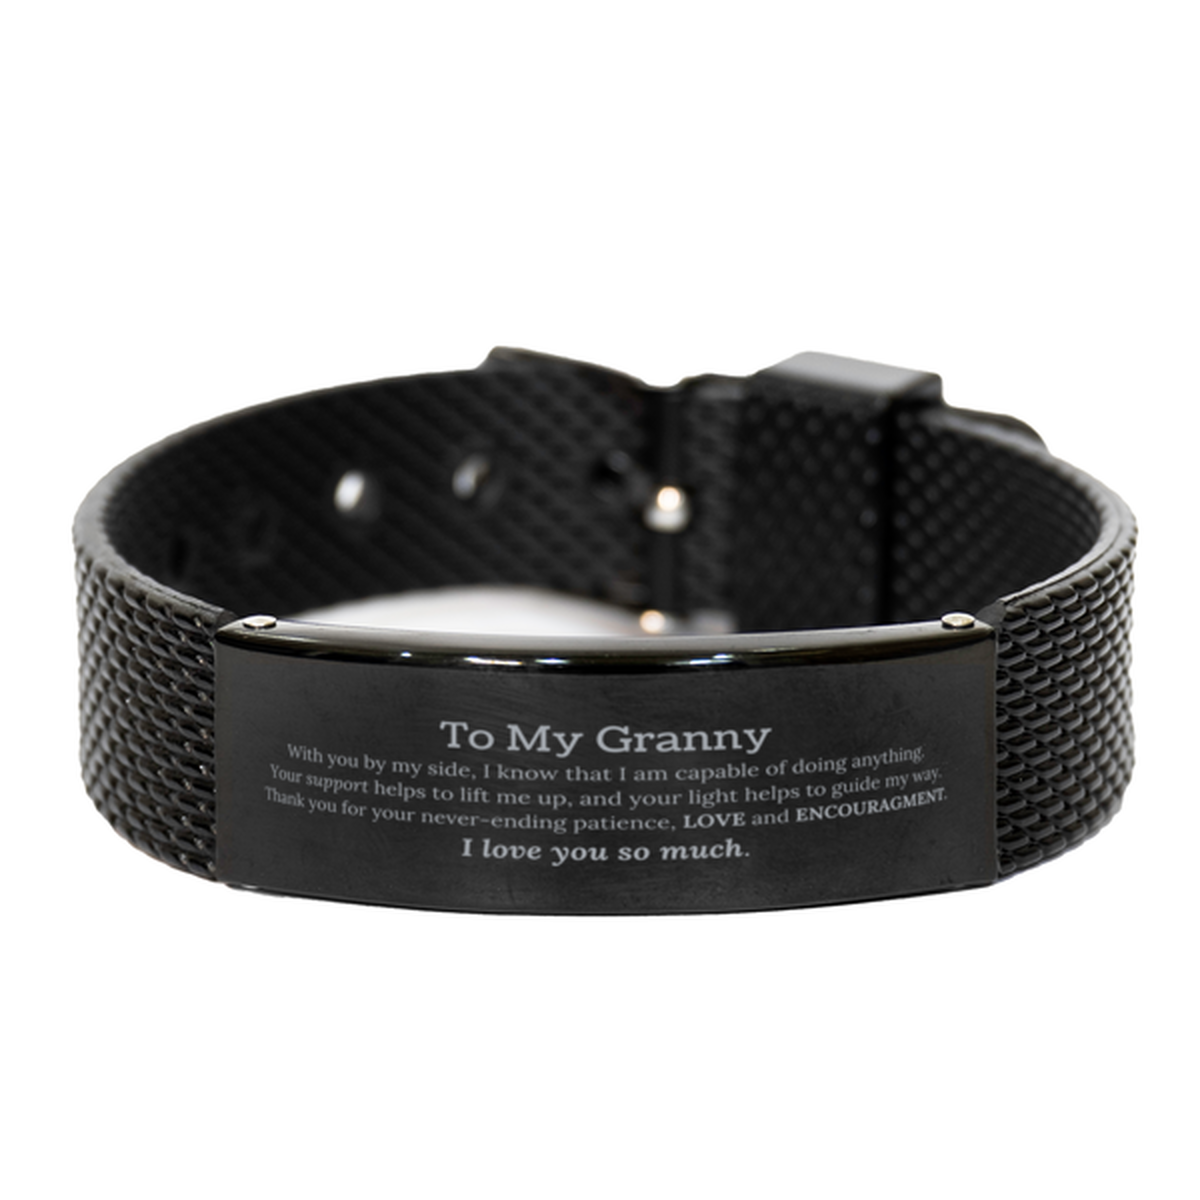 Appreciation Granny Black Shark Mesh Bracelet Gifts, To My Granny Birthday Christmas Wedding Keepsake Gifts for Granny With you by my side, I know that I am capable of doing anything. I love you so much